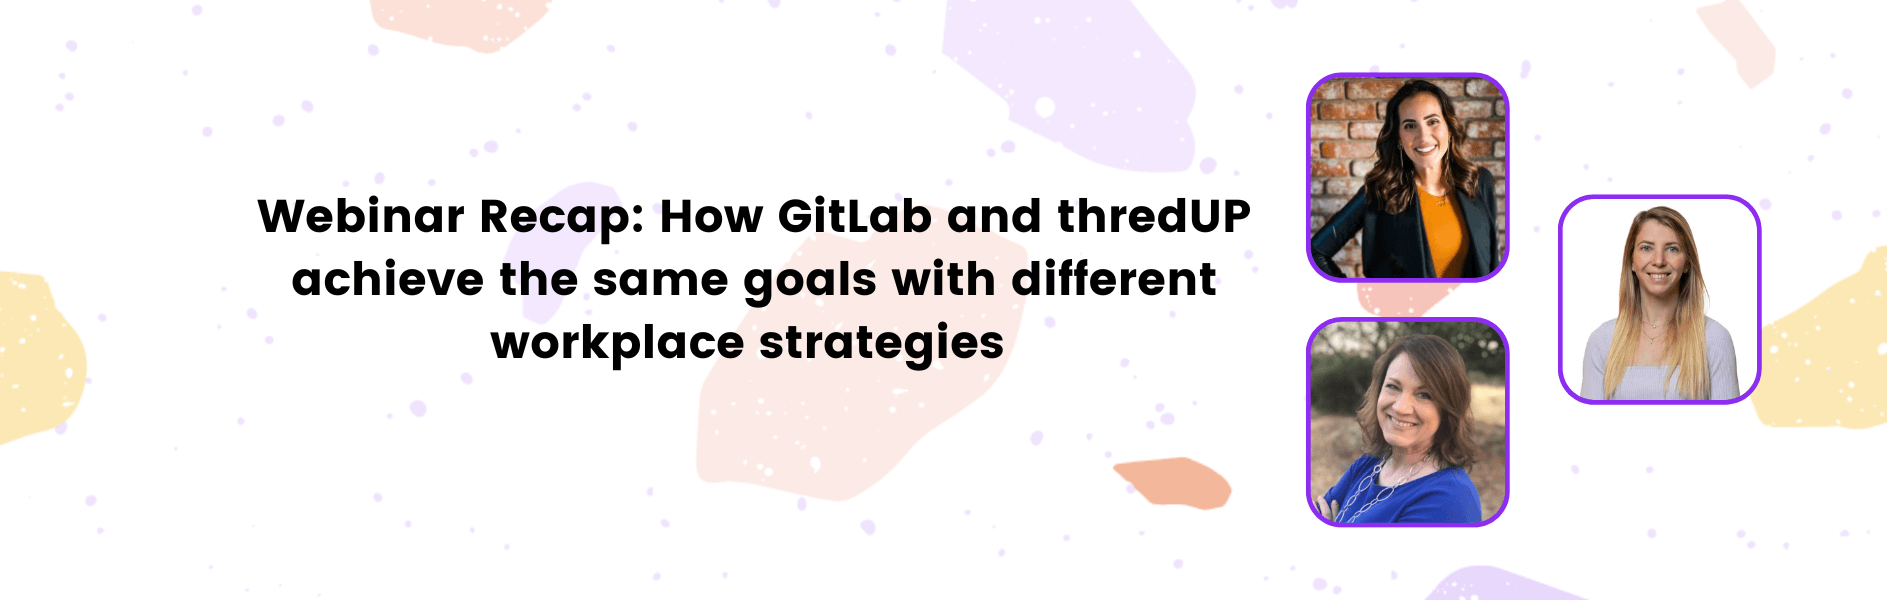 Webinar Recap: How GitLab and thredUP achieve the same goals with different workplace strategies 